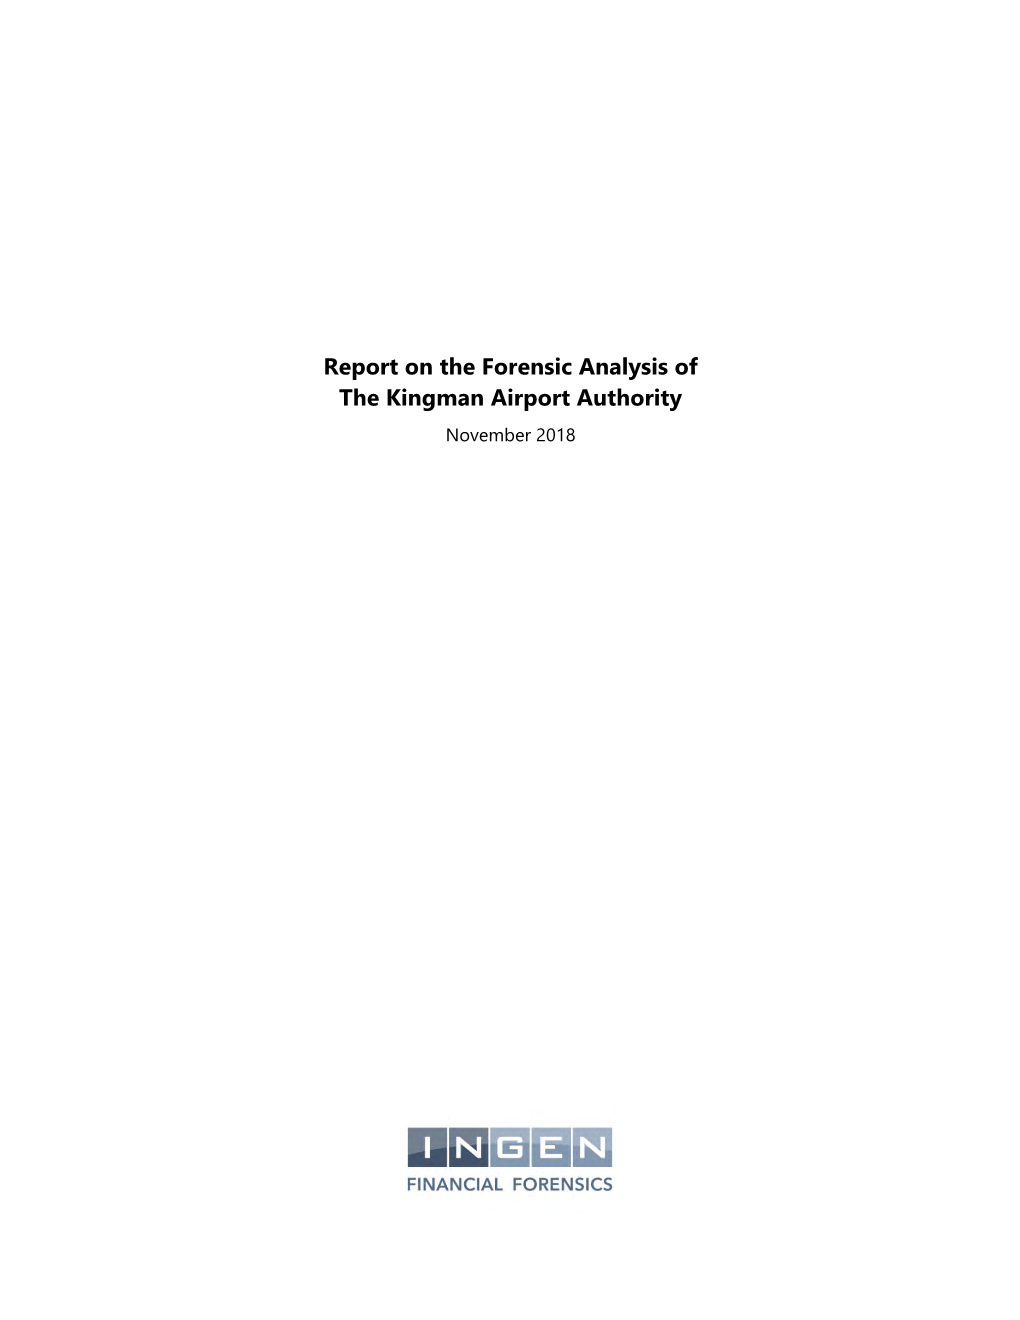 Report on the Forensic Analysis of the Kingman Airport Authority November 2018